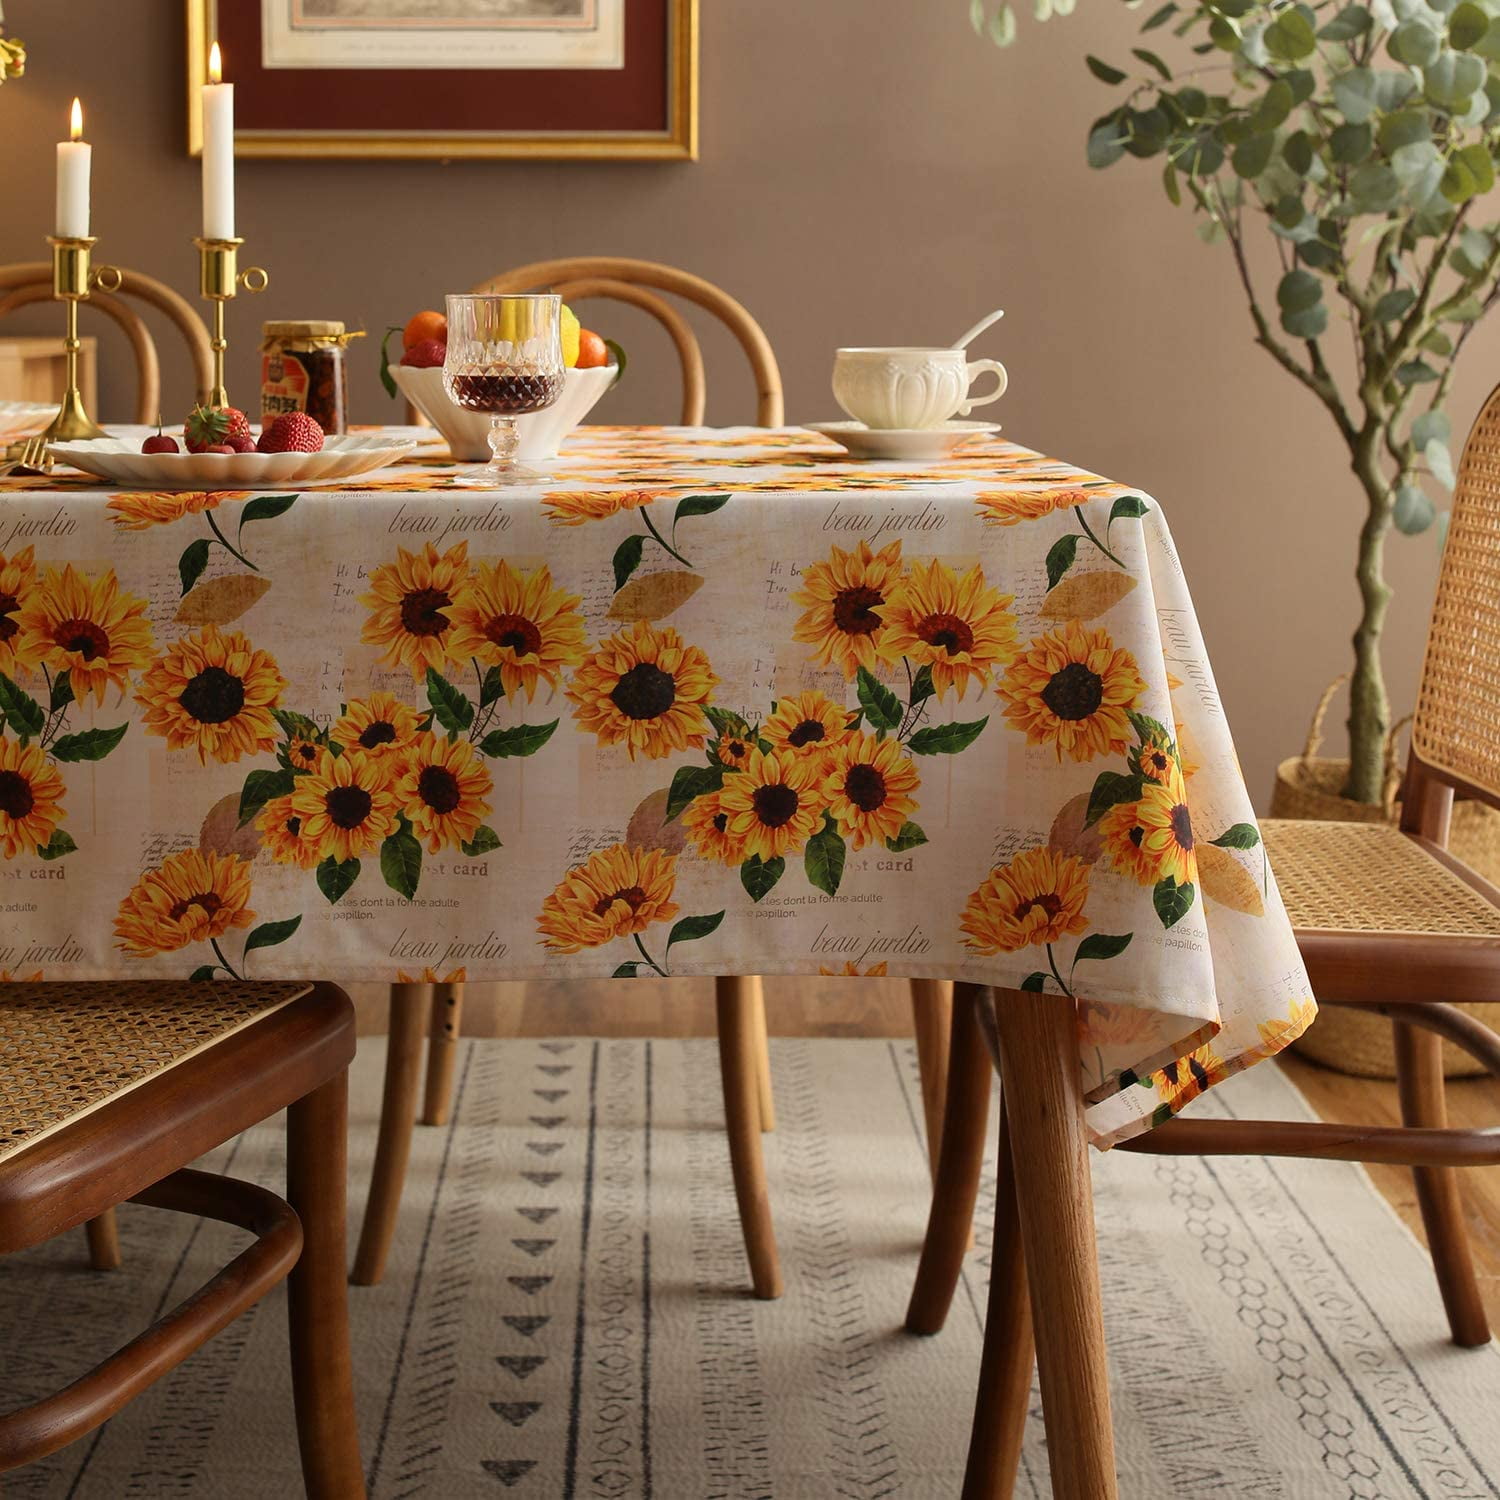 Work Trucks Tablecloth Table Cloth for Rectangle Tables Waterproof Durable Flower Table Cover for Kitchen Dining Room 54 X 72 Inch